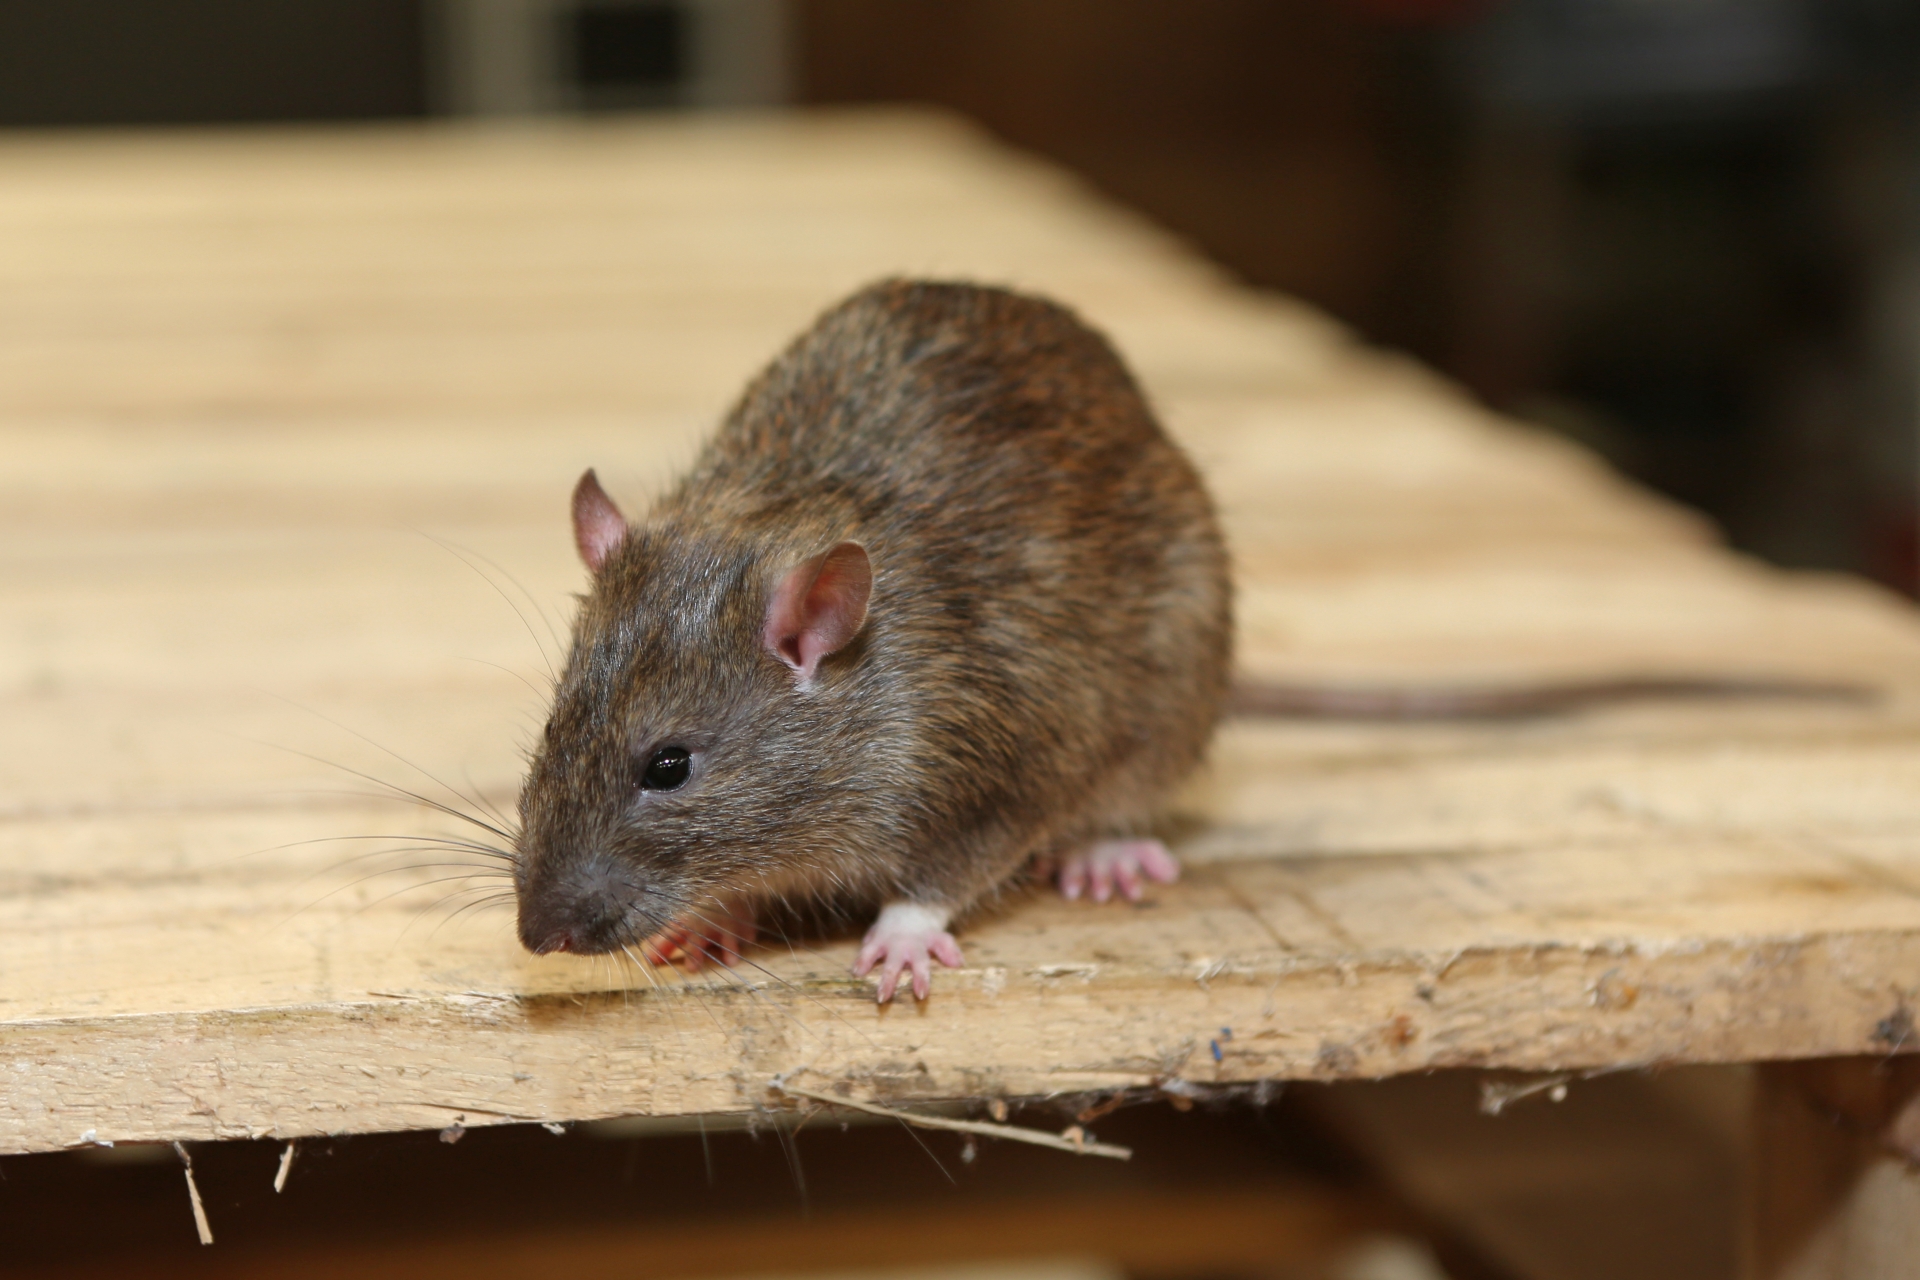 Rat Infestation, Pest Control in Watford, Cassiobury, WD17. Call Now 020 8166 9746